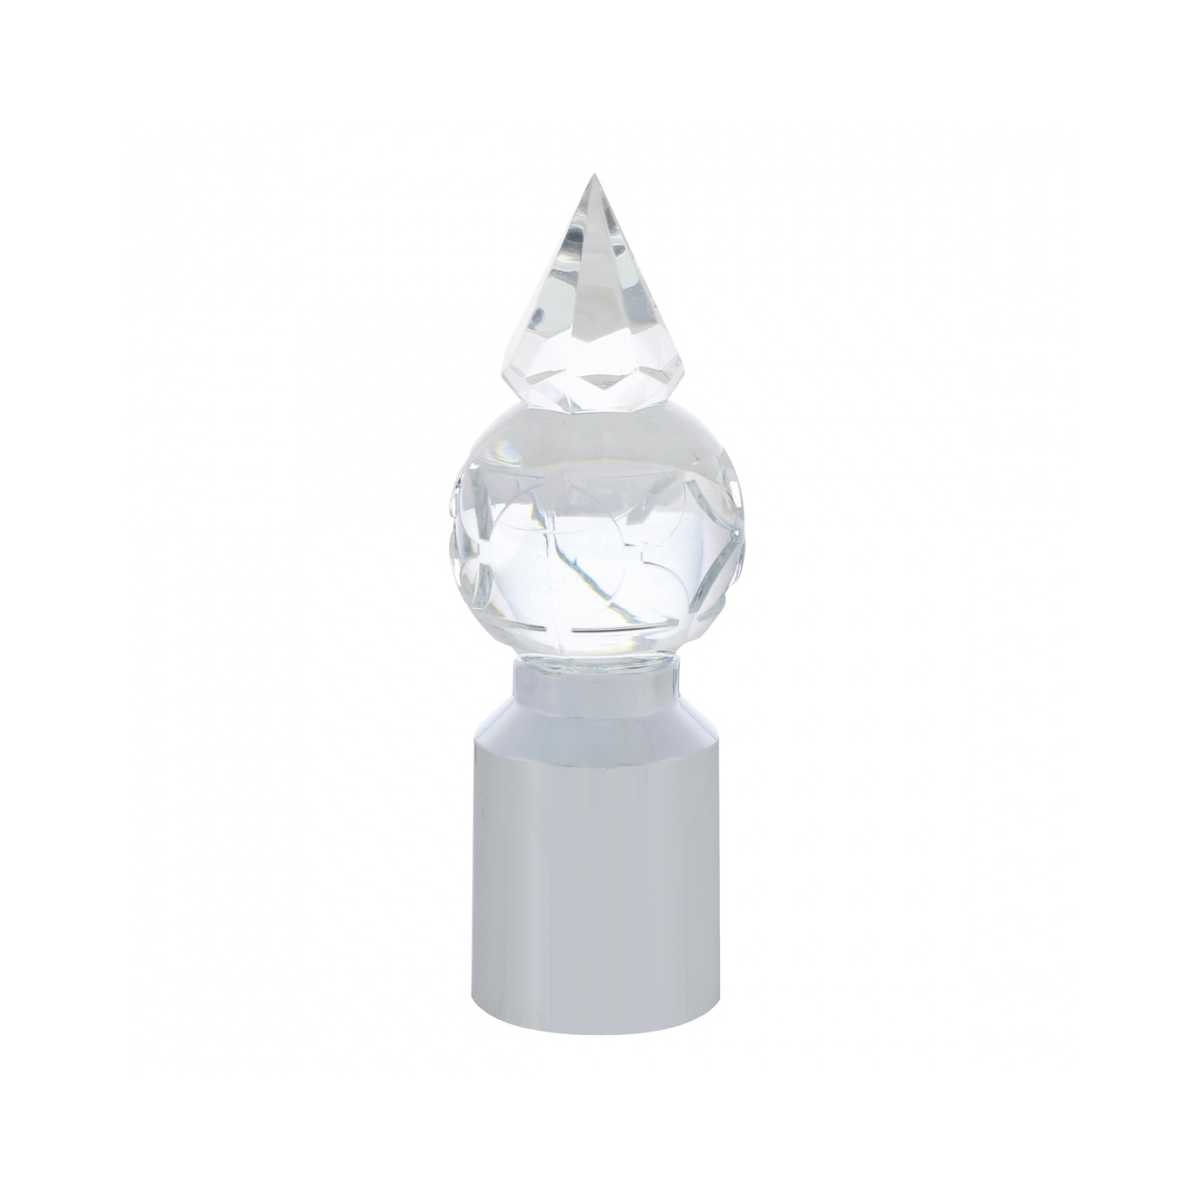 Crystal Pyramid Ball Bumper Guide Top - Clear (2 Pack)